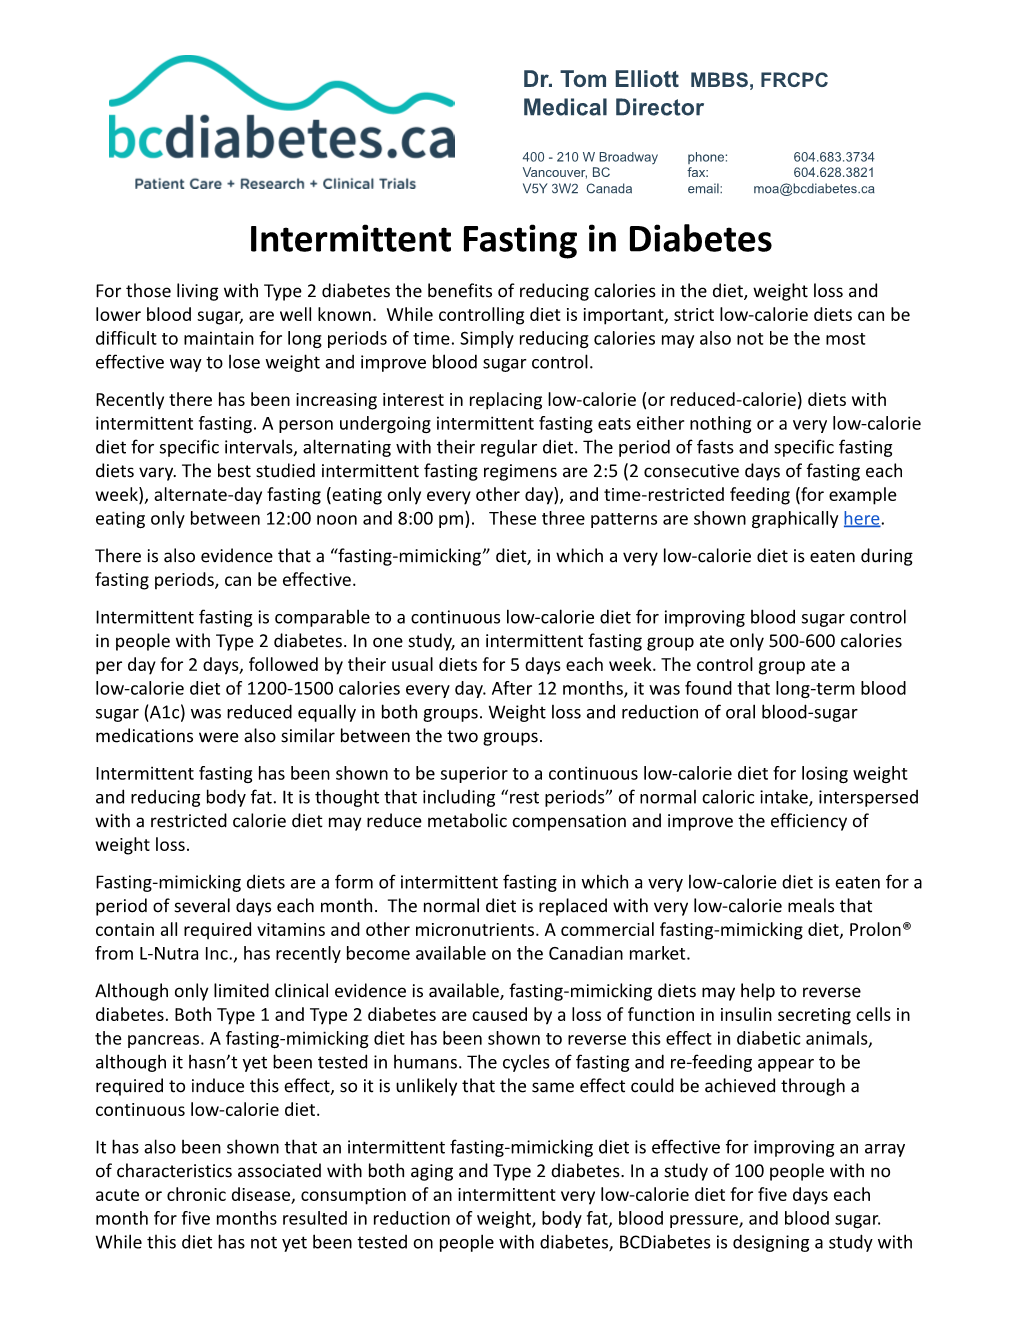 Intermittent Fasting in Diabetes